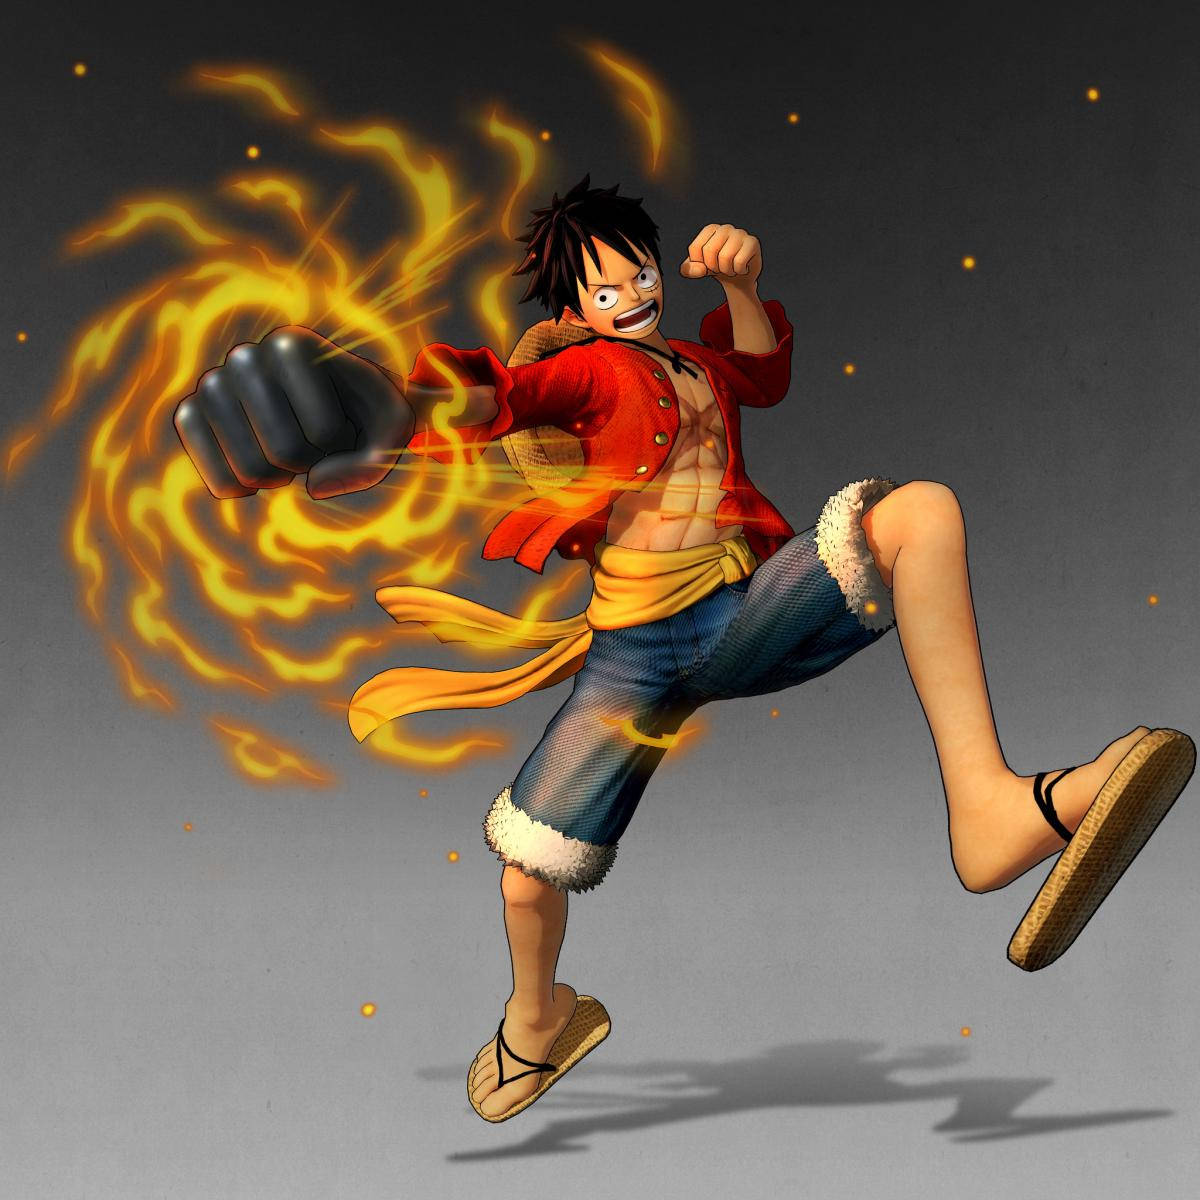 Luffy's Punch One Piece Wallpaper